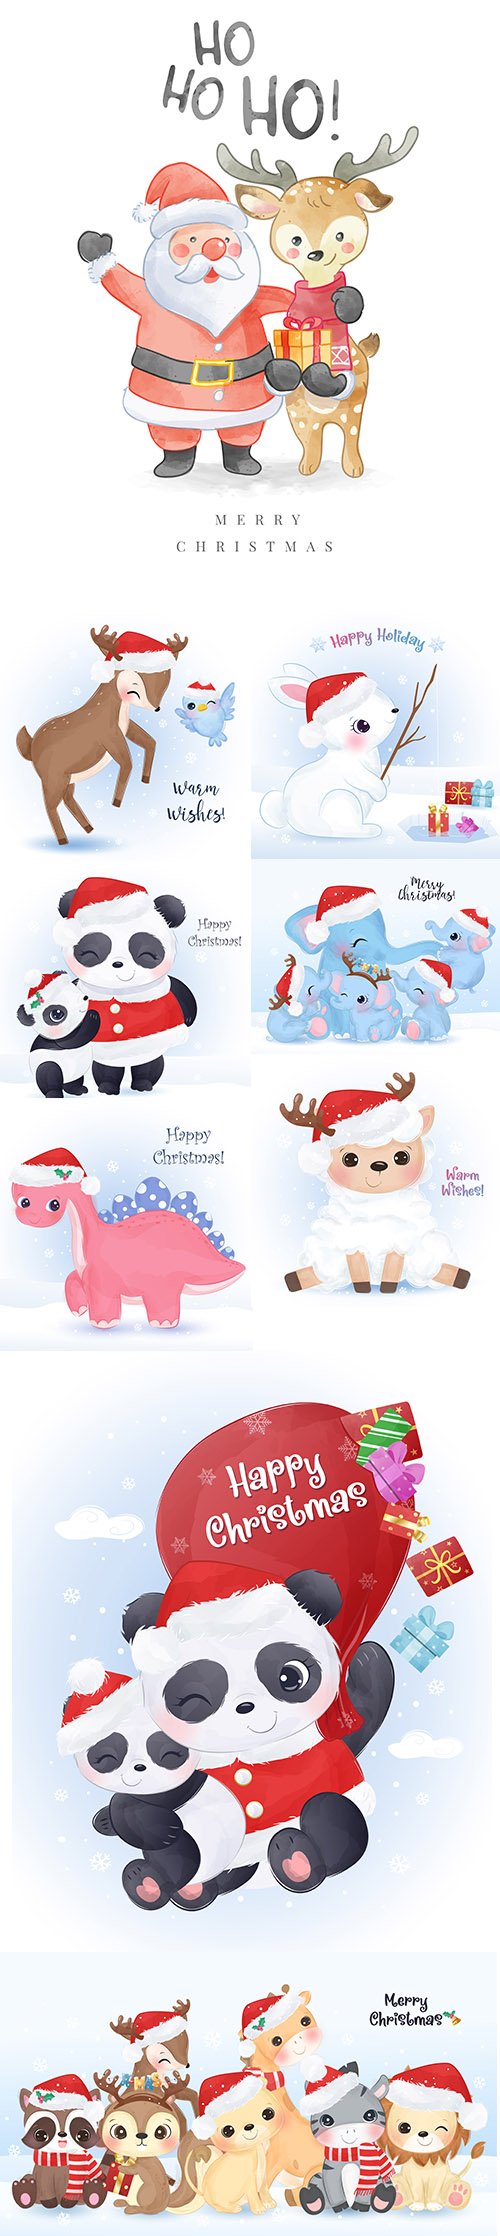 Christmas greeting card with cute animals